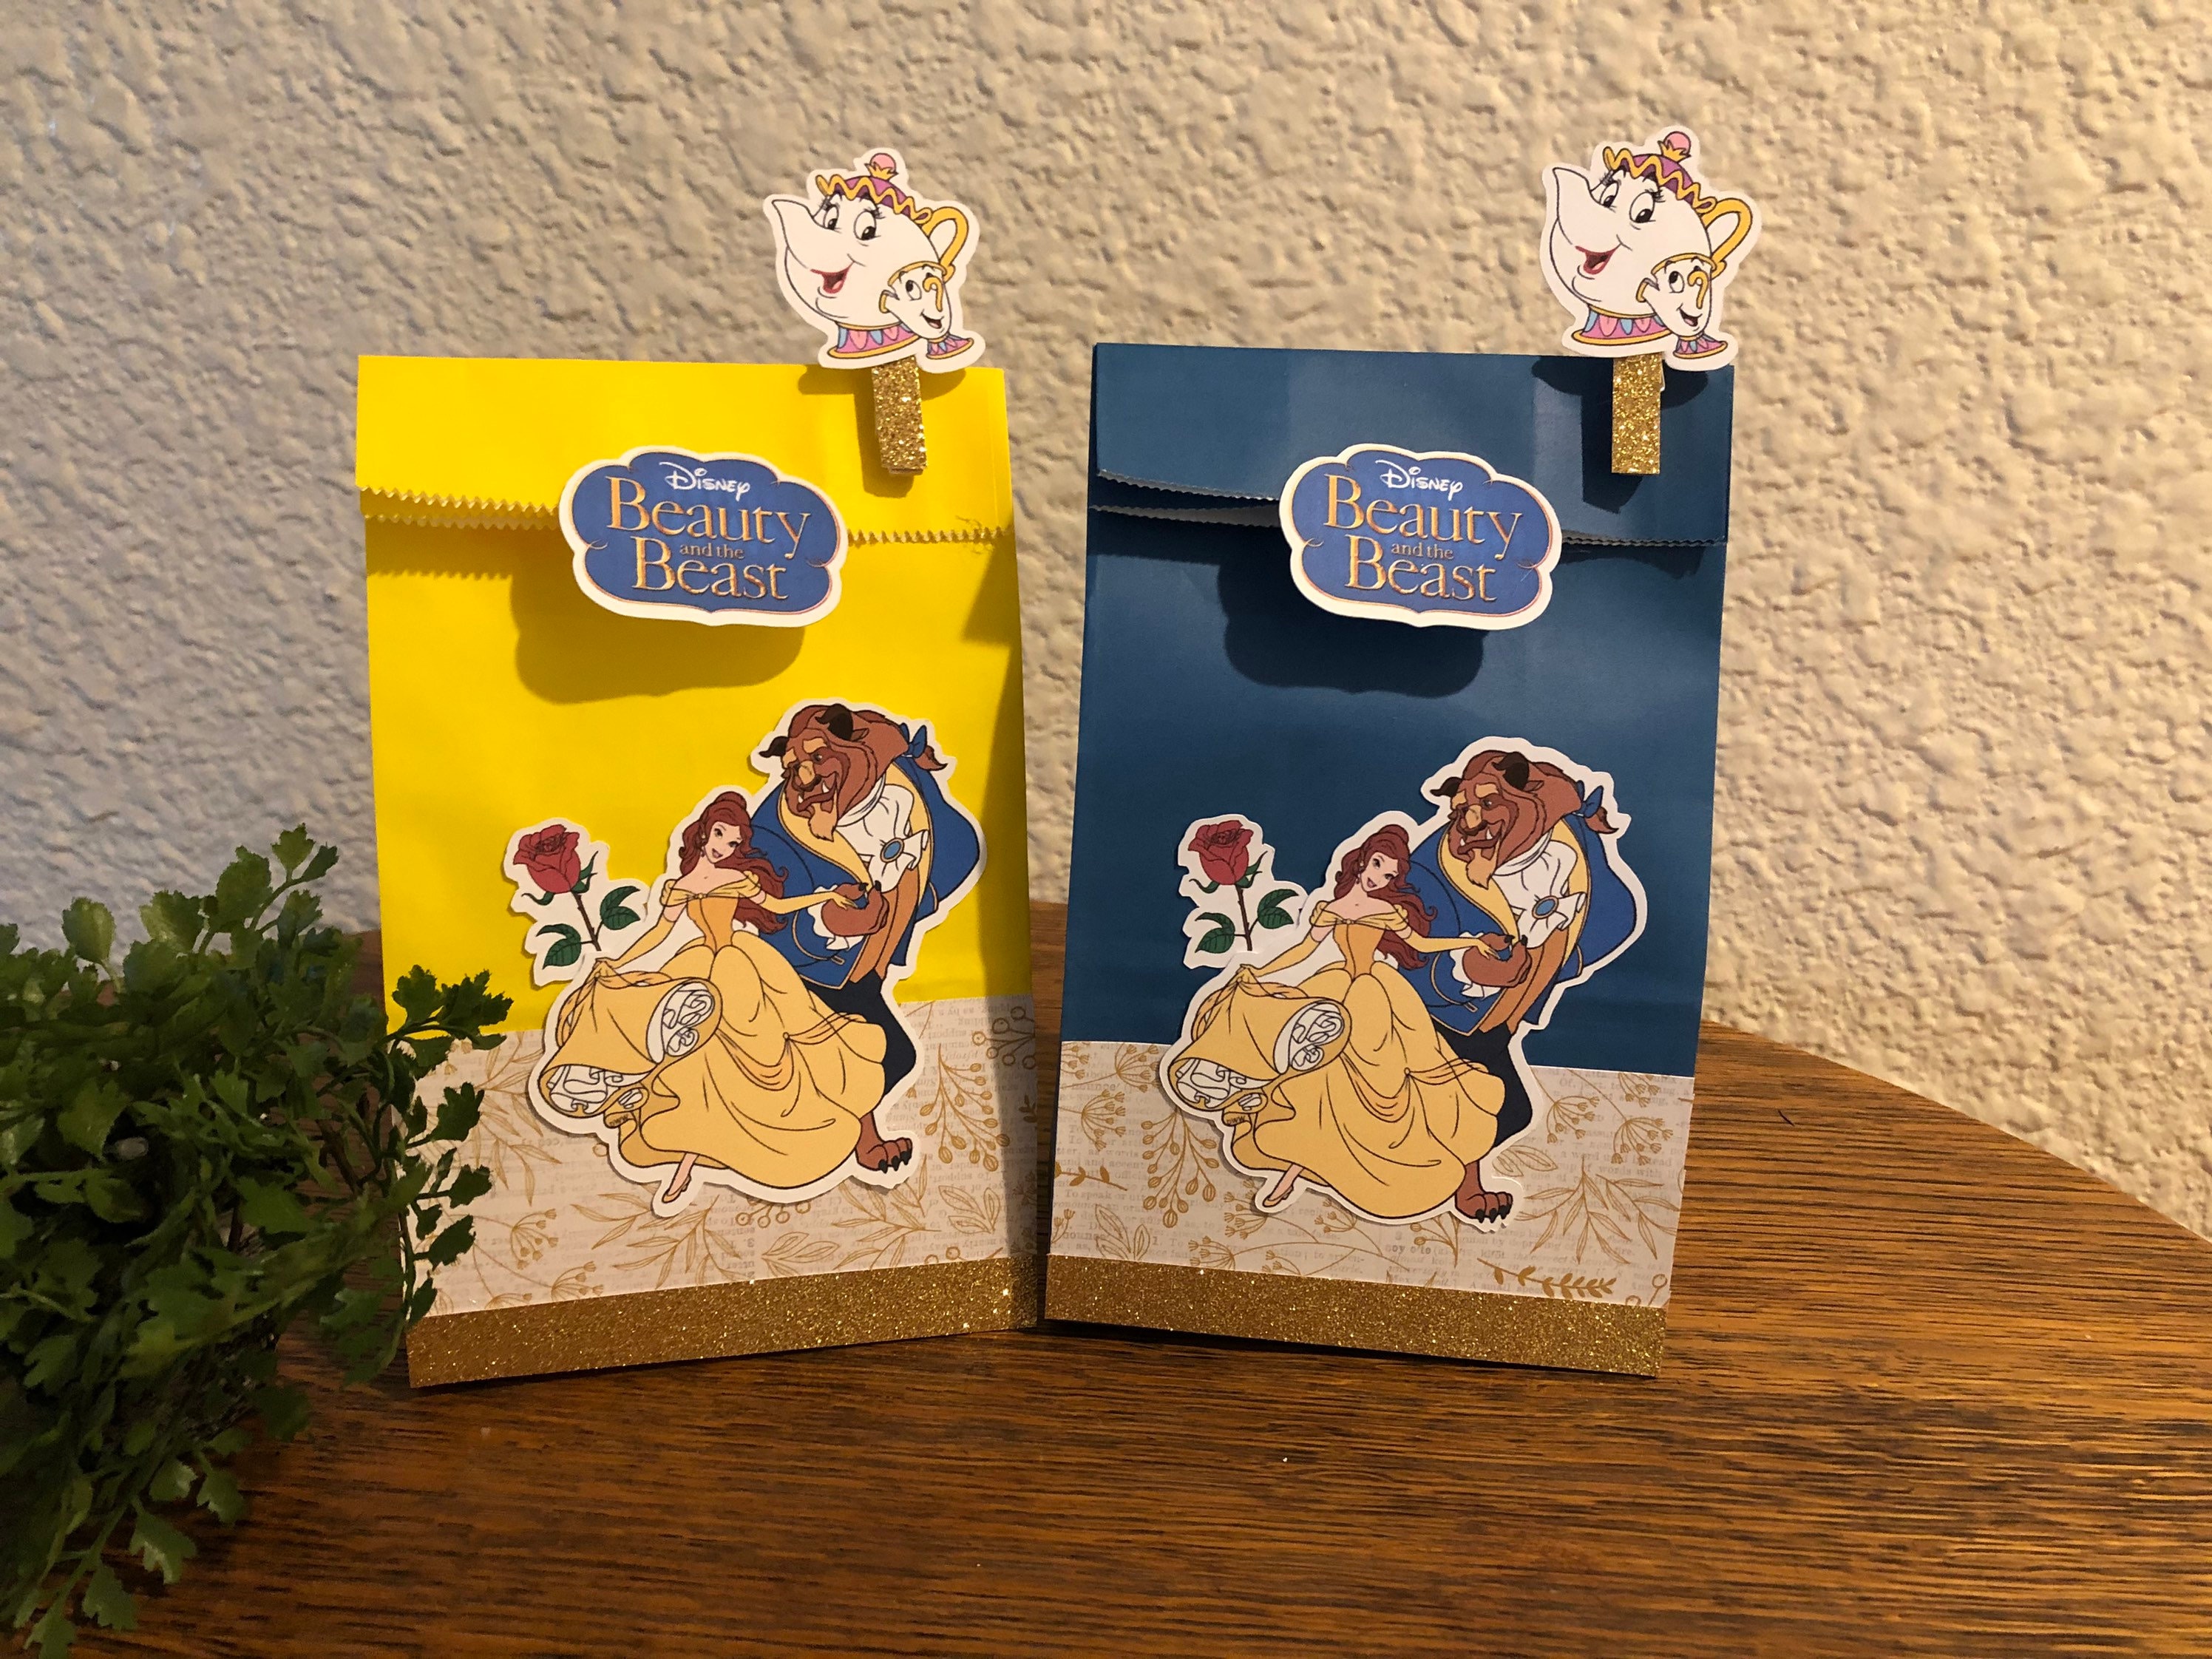 Green M  Beauty and beast birthday, M&m characters, Bags